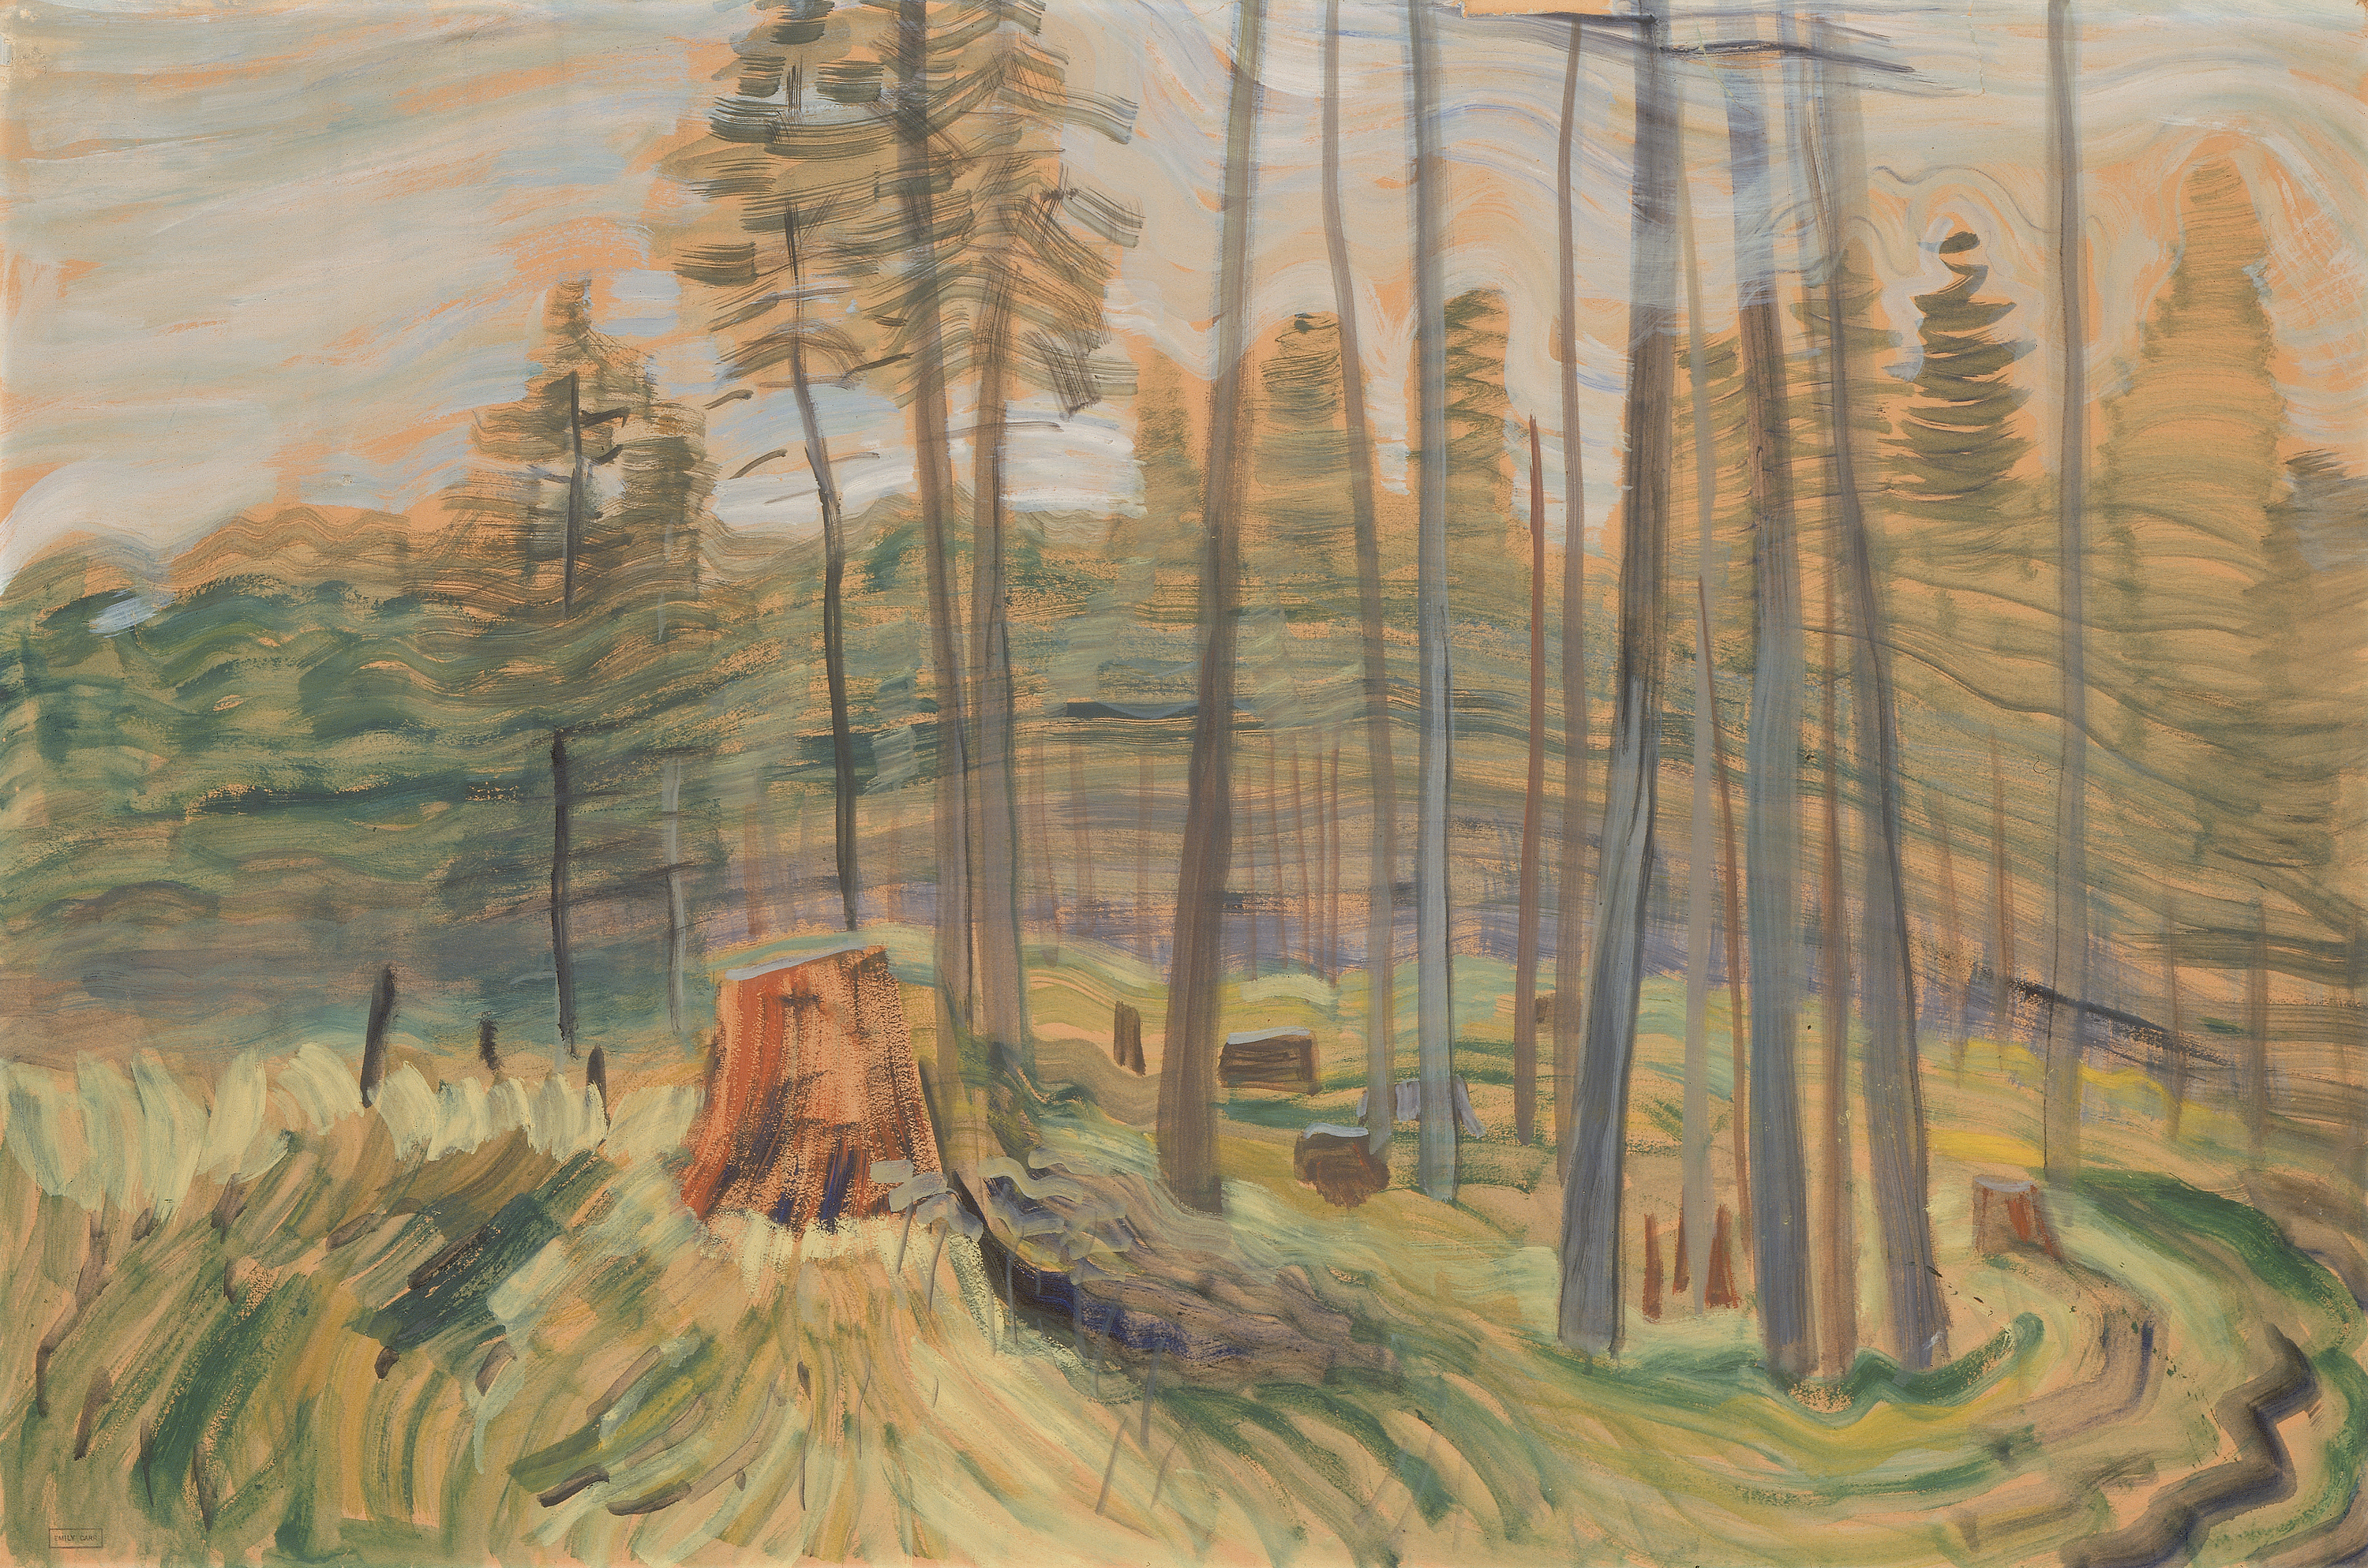 Oil painting depicting a stump surrounded by a grove of tall coniferous trees with concentric waves of vegetation below and behind.